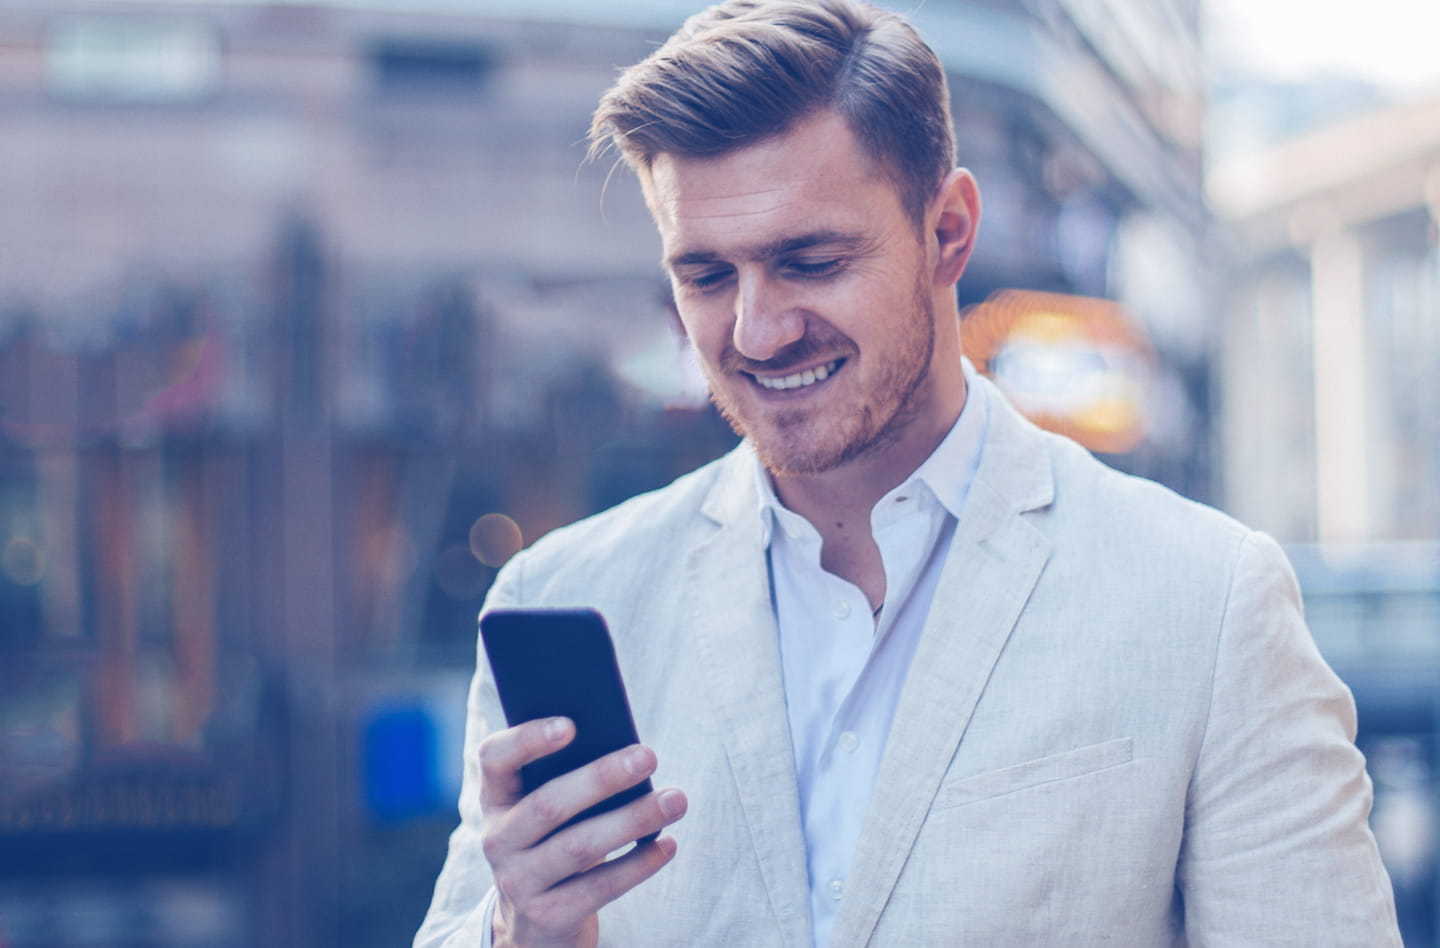 Man smiling as he looks at mobile phone